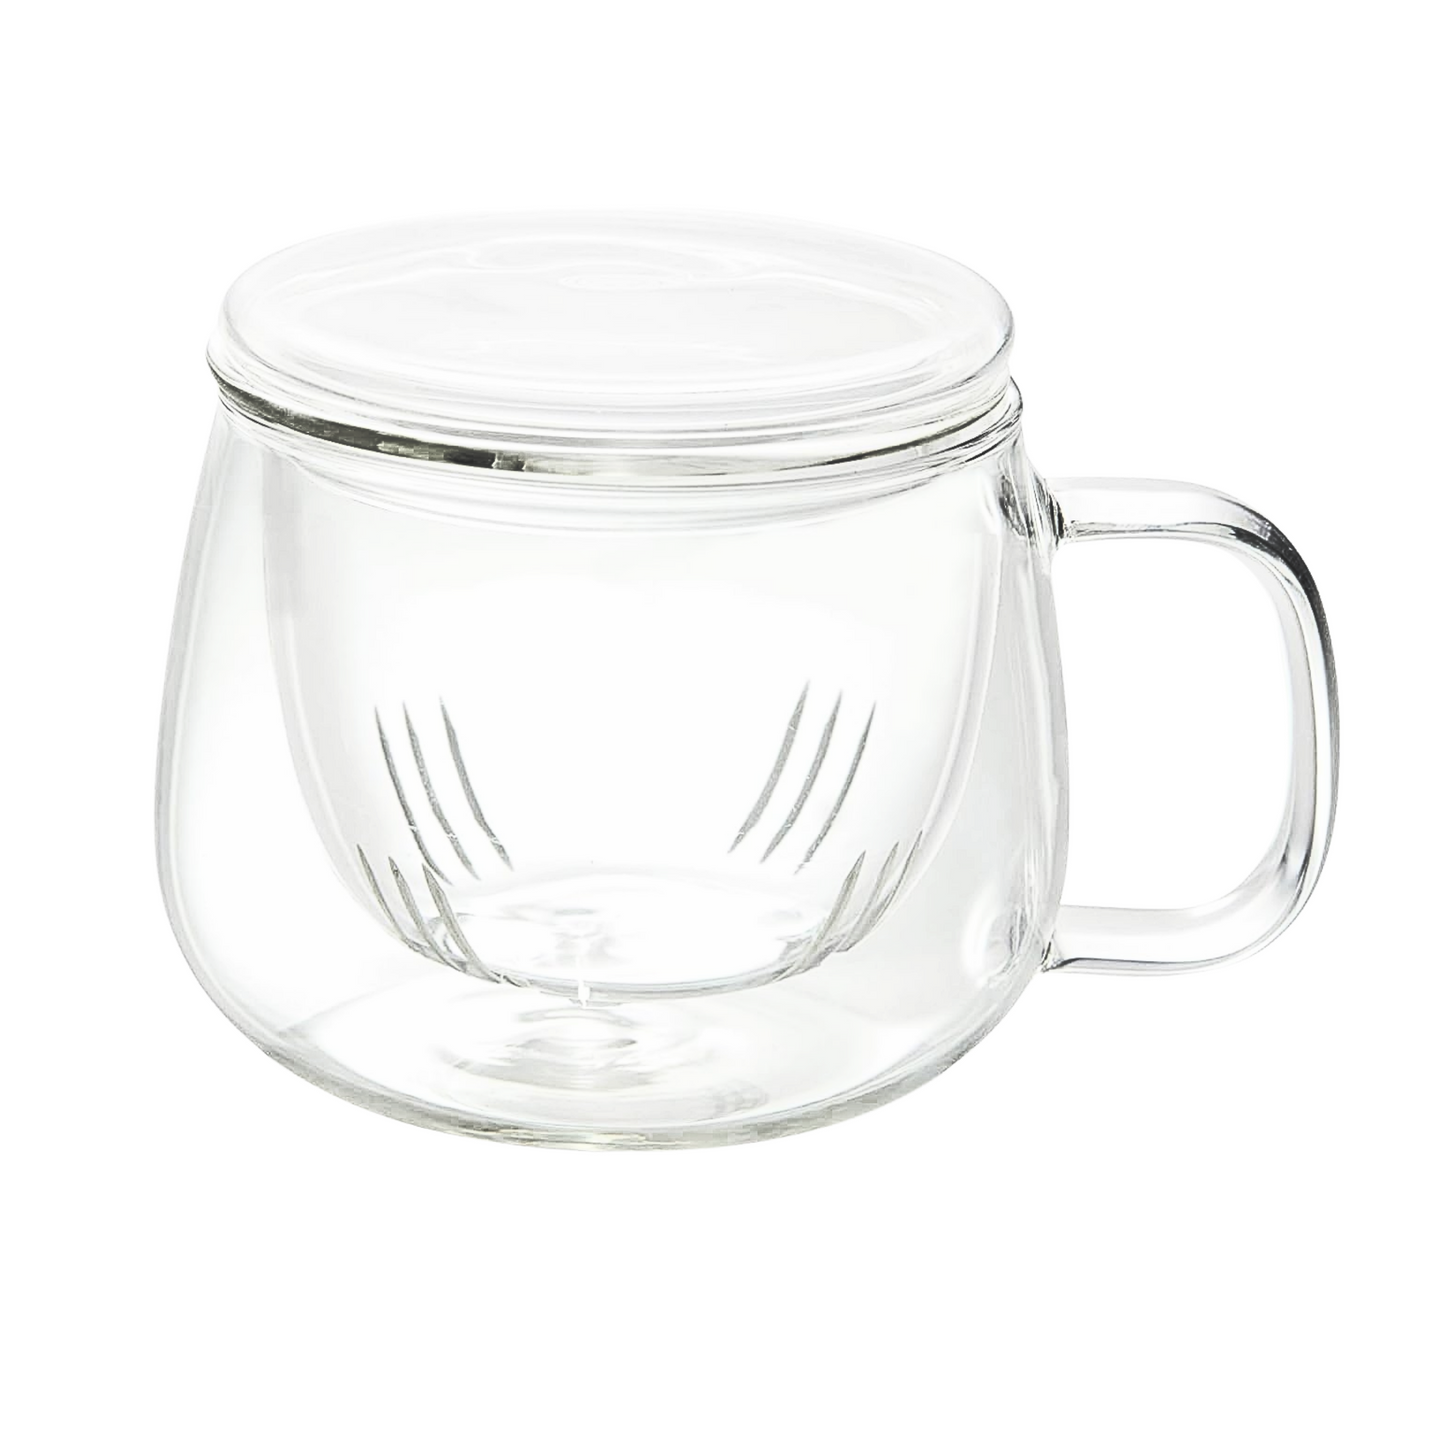 Infusion Glass Tea Cup with Infuser for Loose Leaf Tea